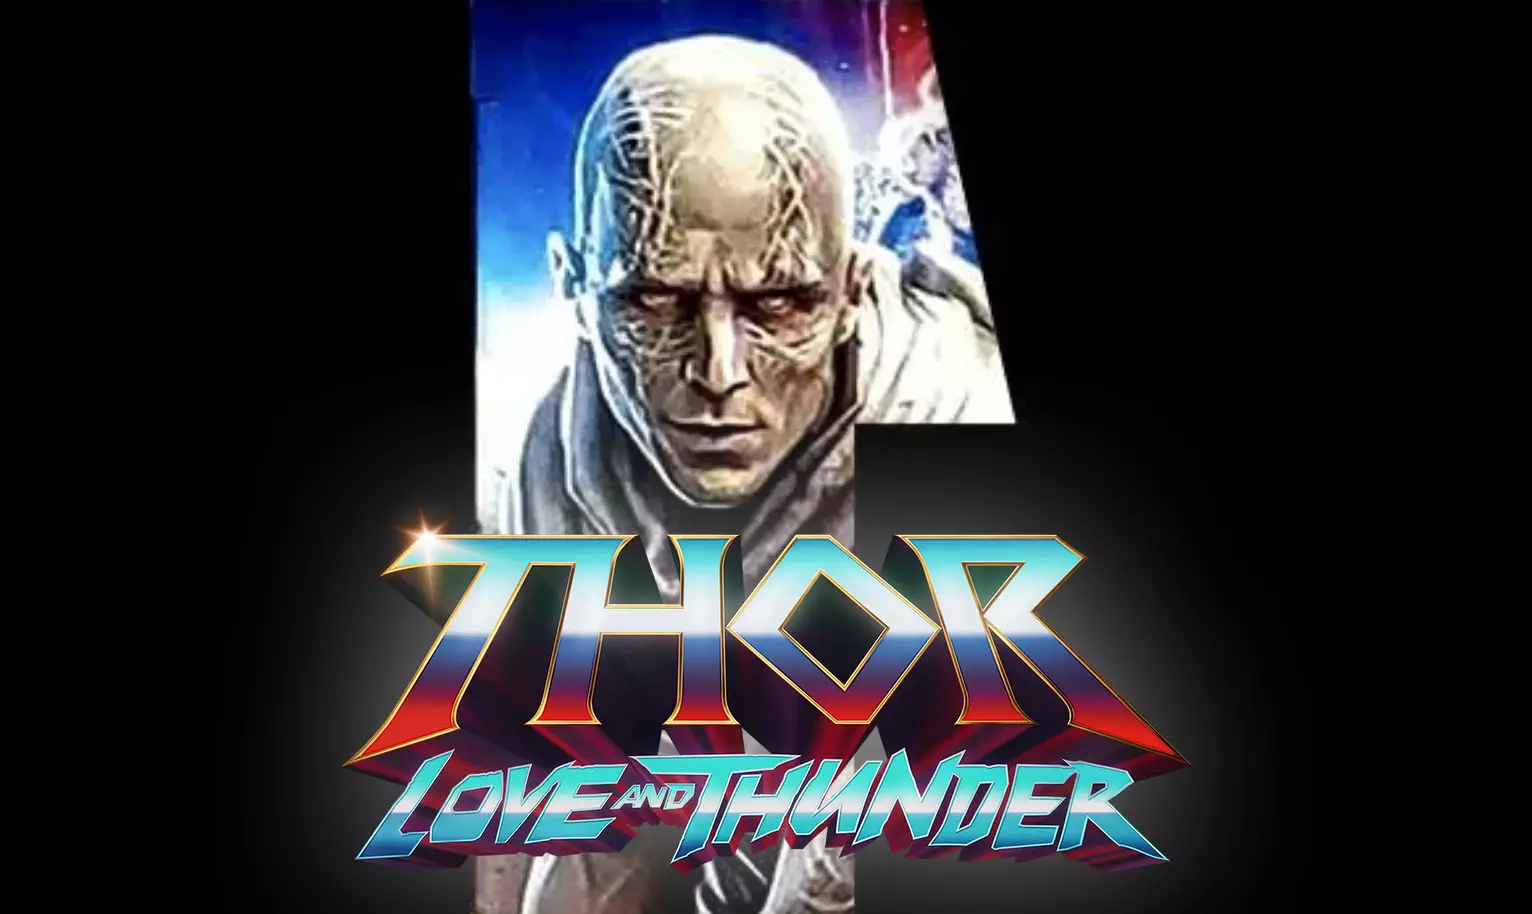 See Christian Bale's Gorr In The Upcoming Thor: Love And Thunder